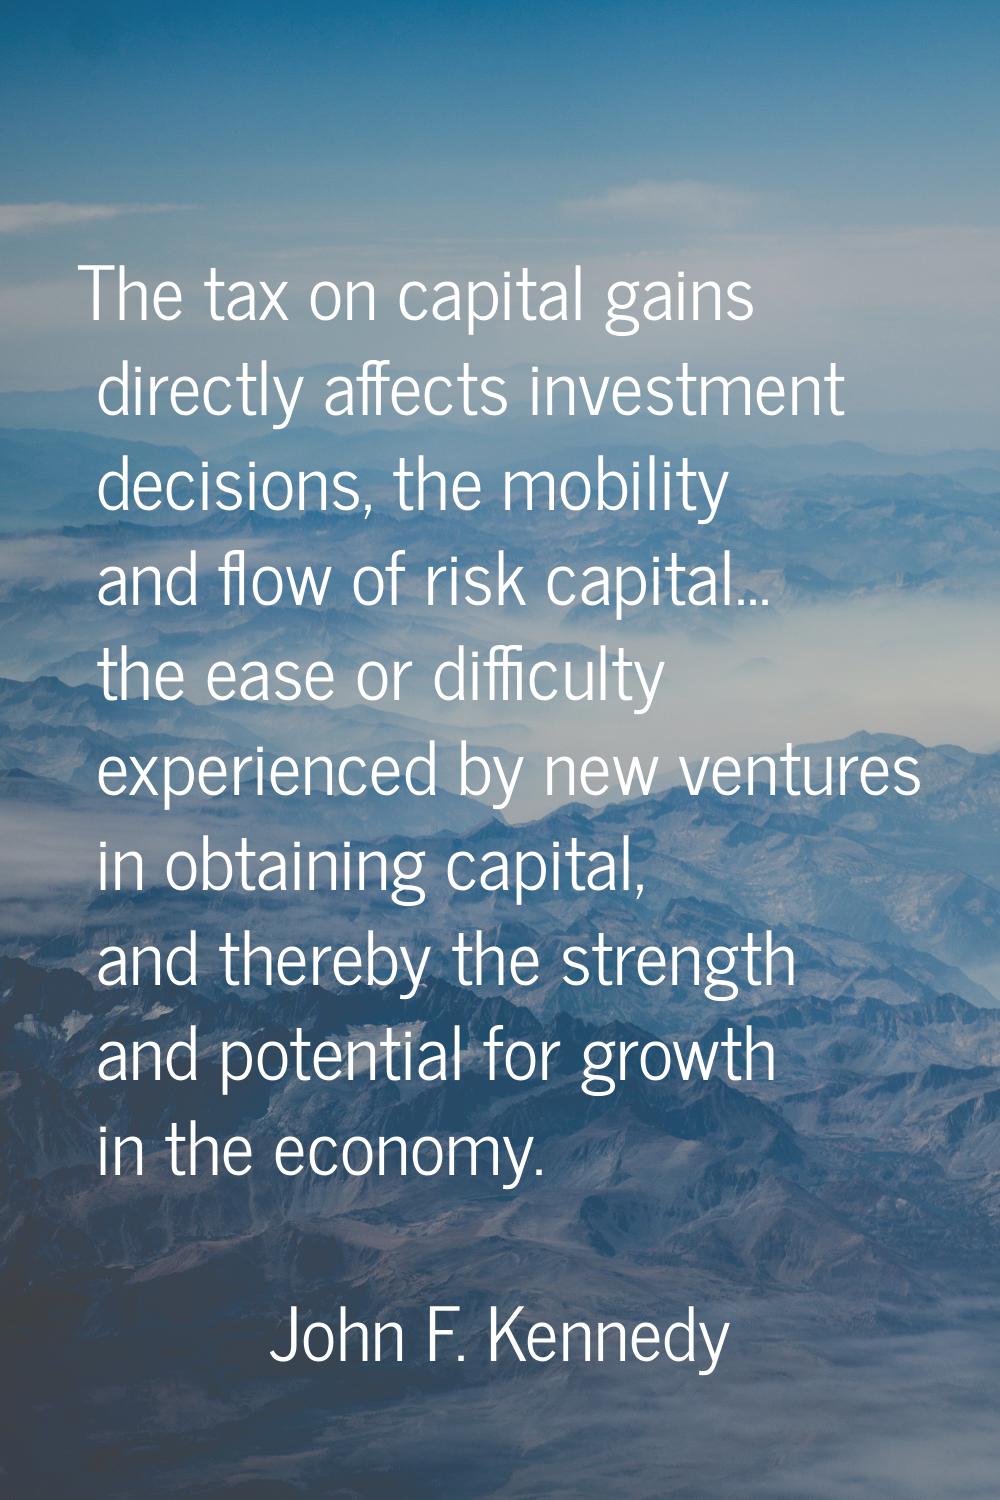 The tax on capital gains directly affects investment decisions, the mobility and flow of risk capit